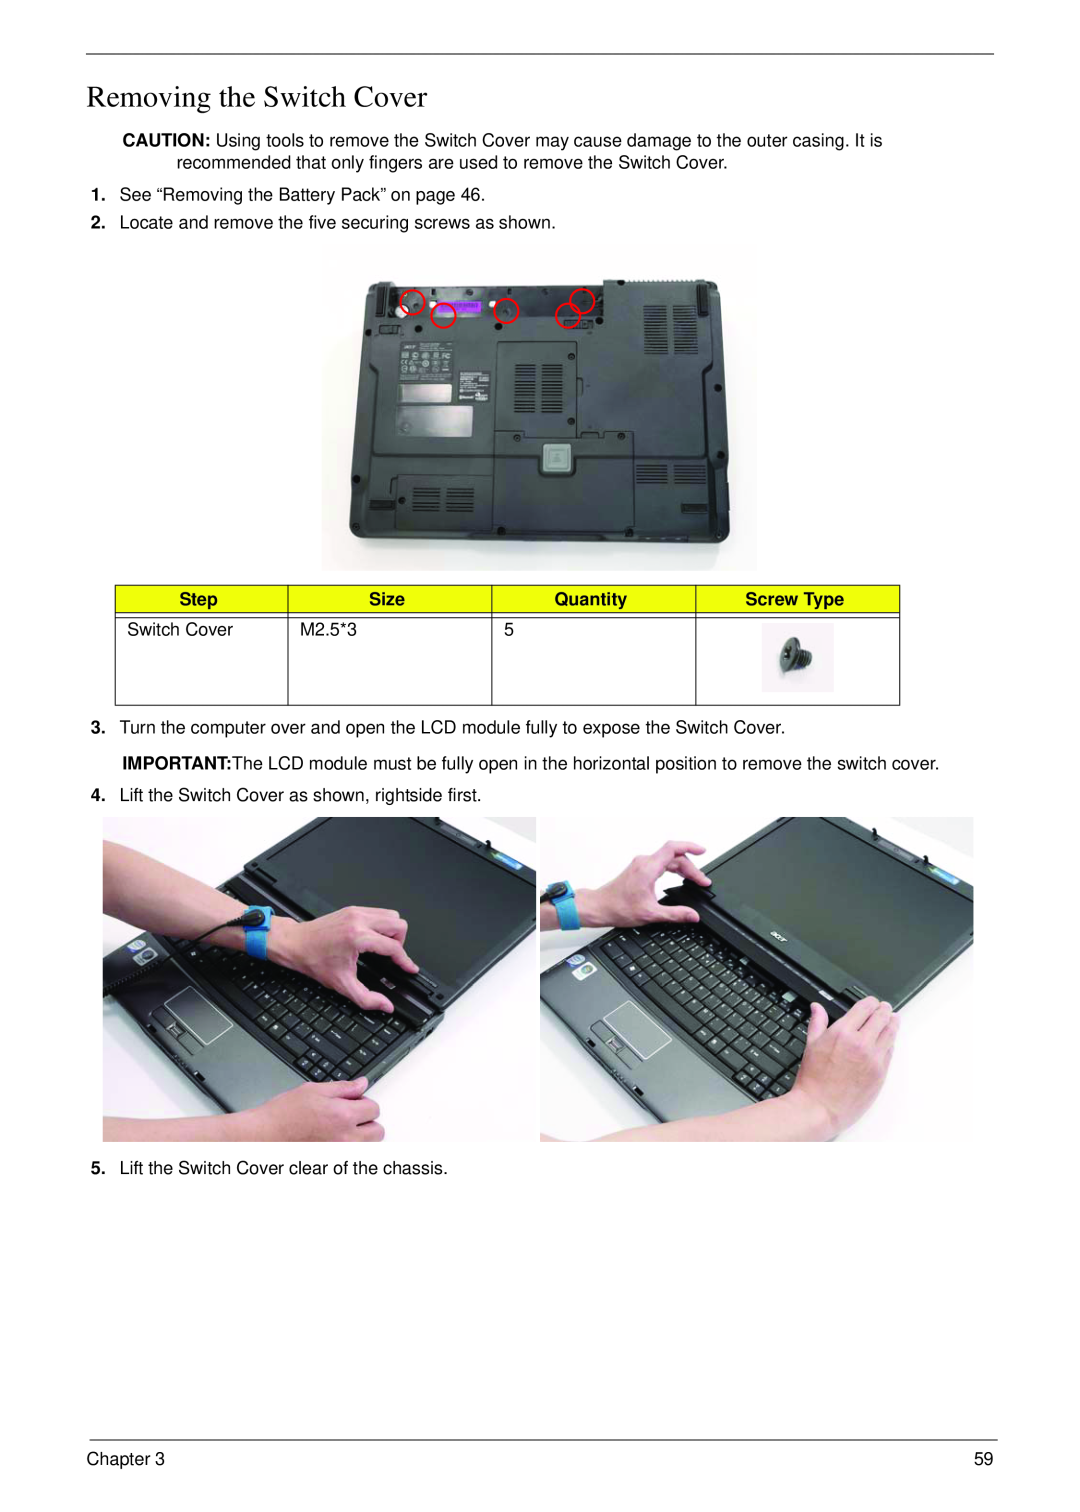 Acer 4730 manual Removing the Switch Cover, Step, Size, Quantity, Screw Type, M2.5*3 